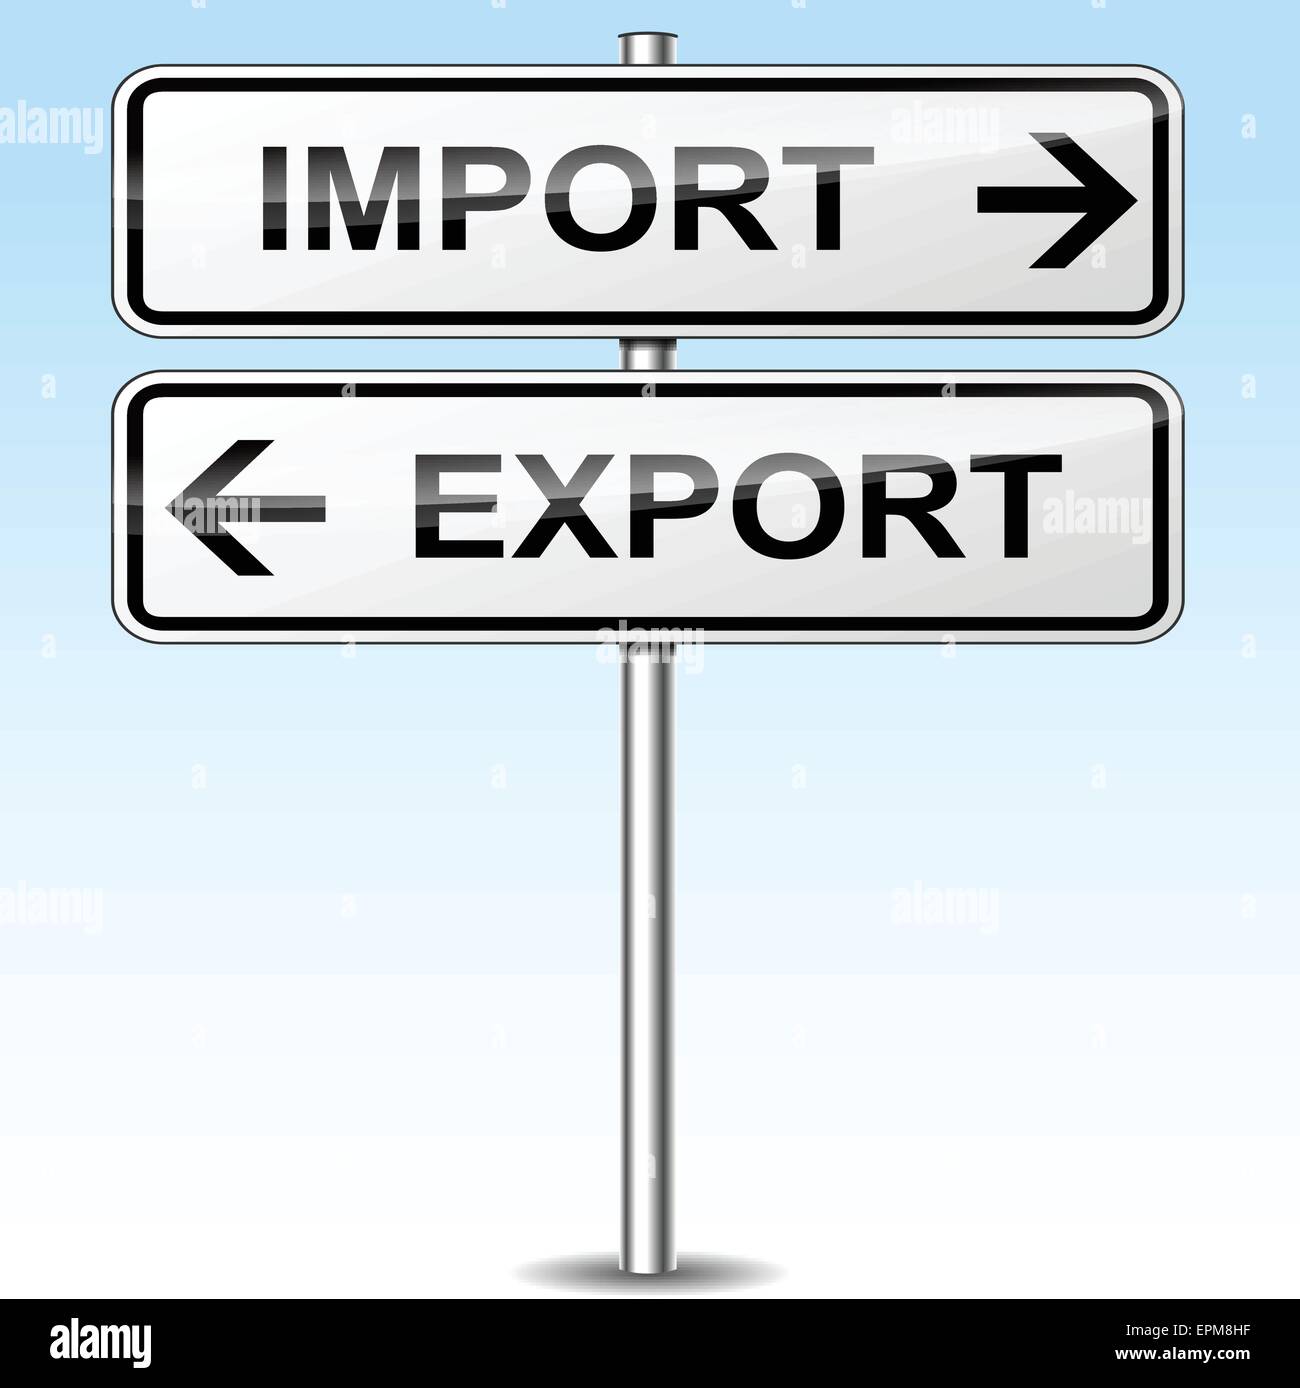 illustration of import and export directions sign Stock Vector